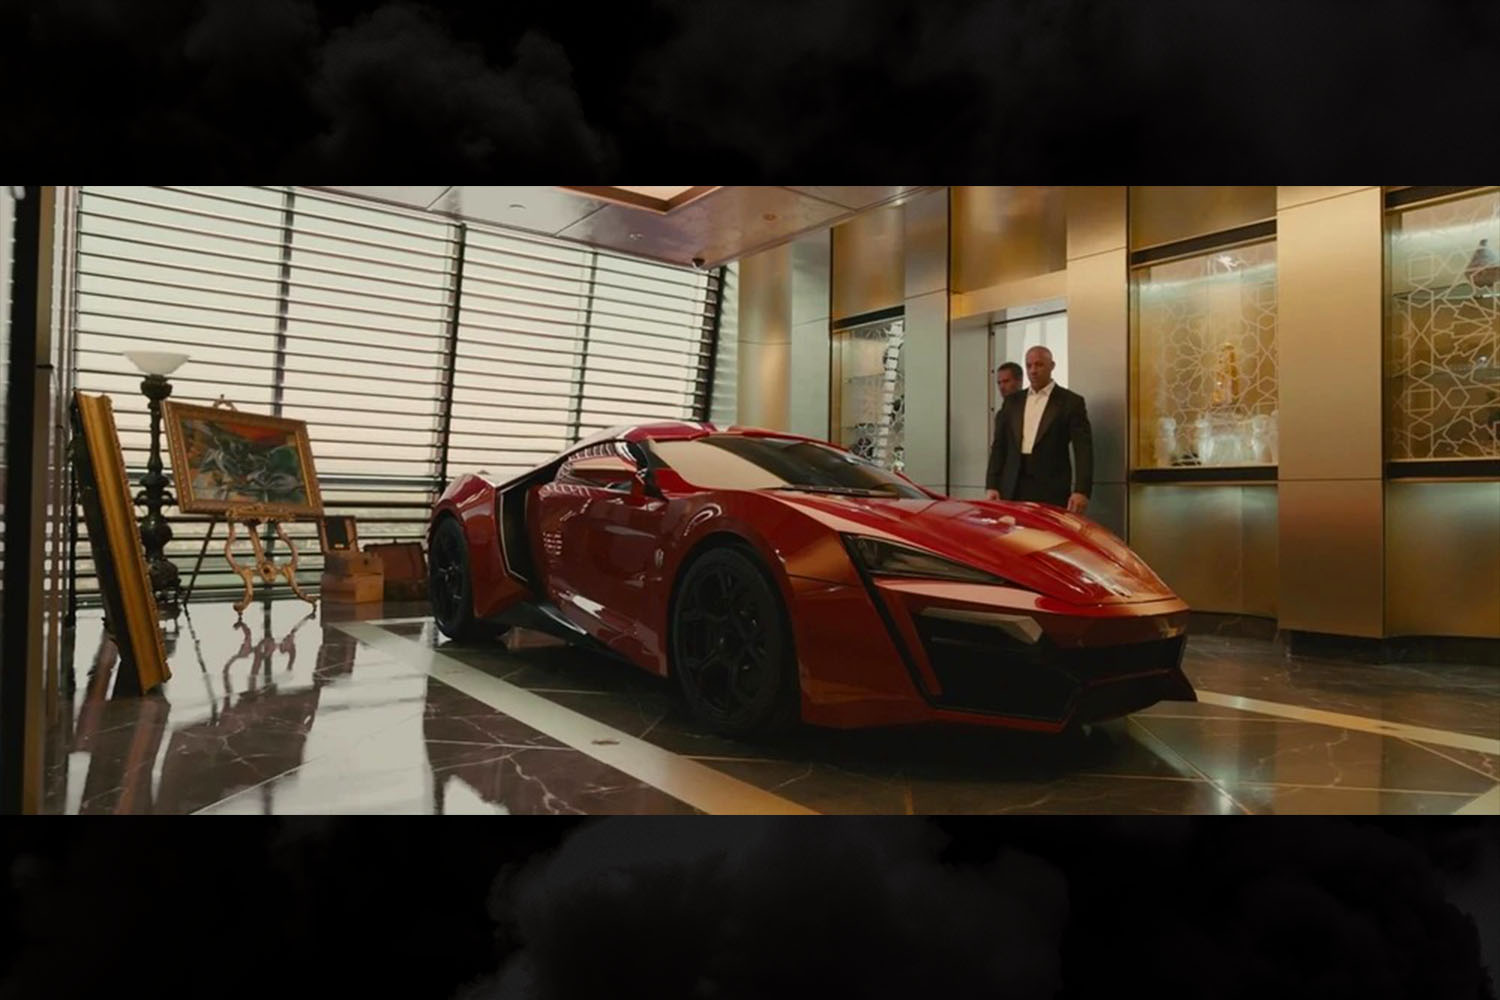 The red W Motors Lykan HyperSport driven by Dominic Toretto (Vin Diesel) in Furious 7, and eventually jumped between skyscrapers